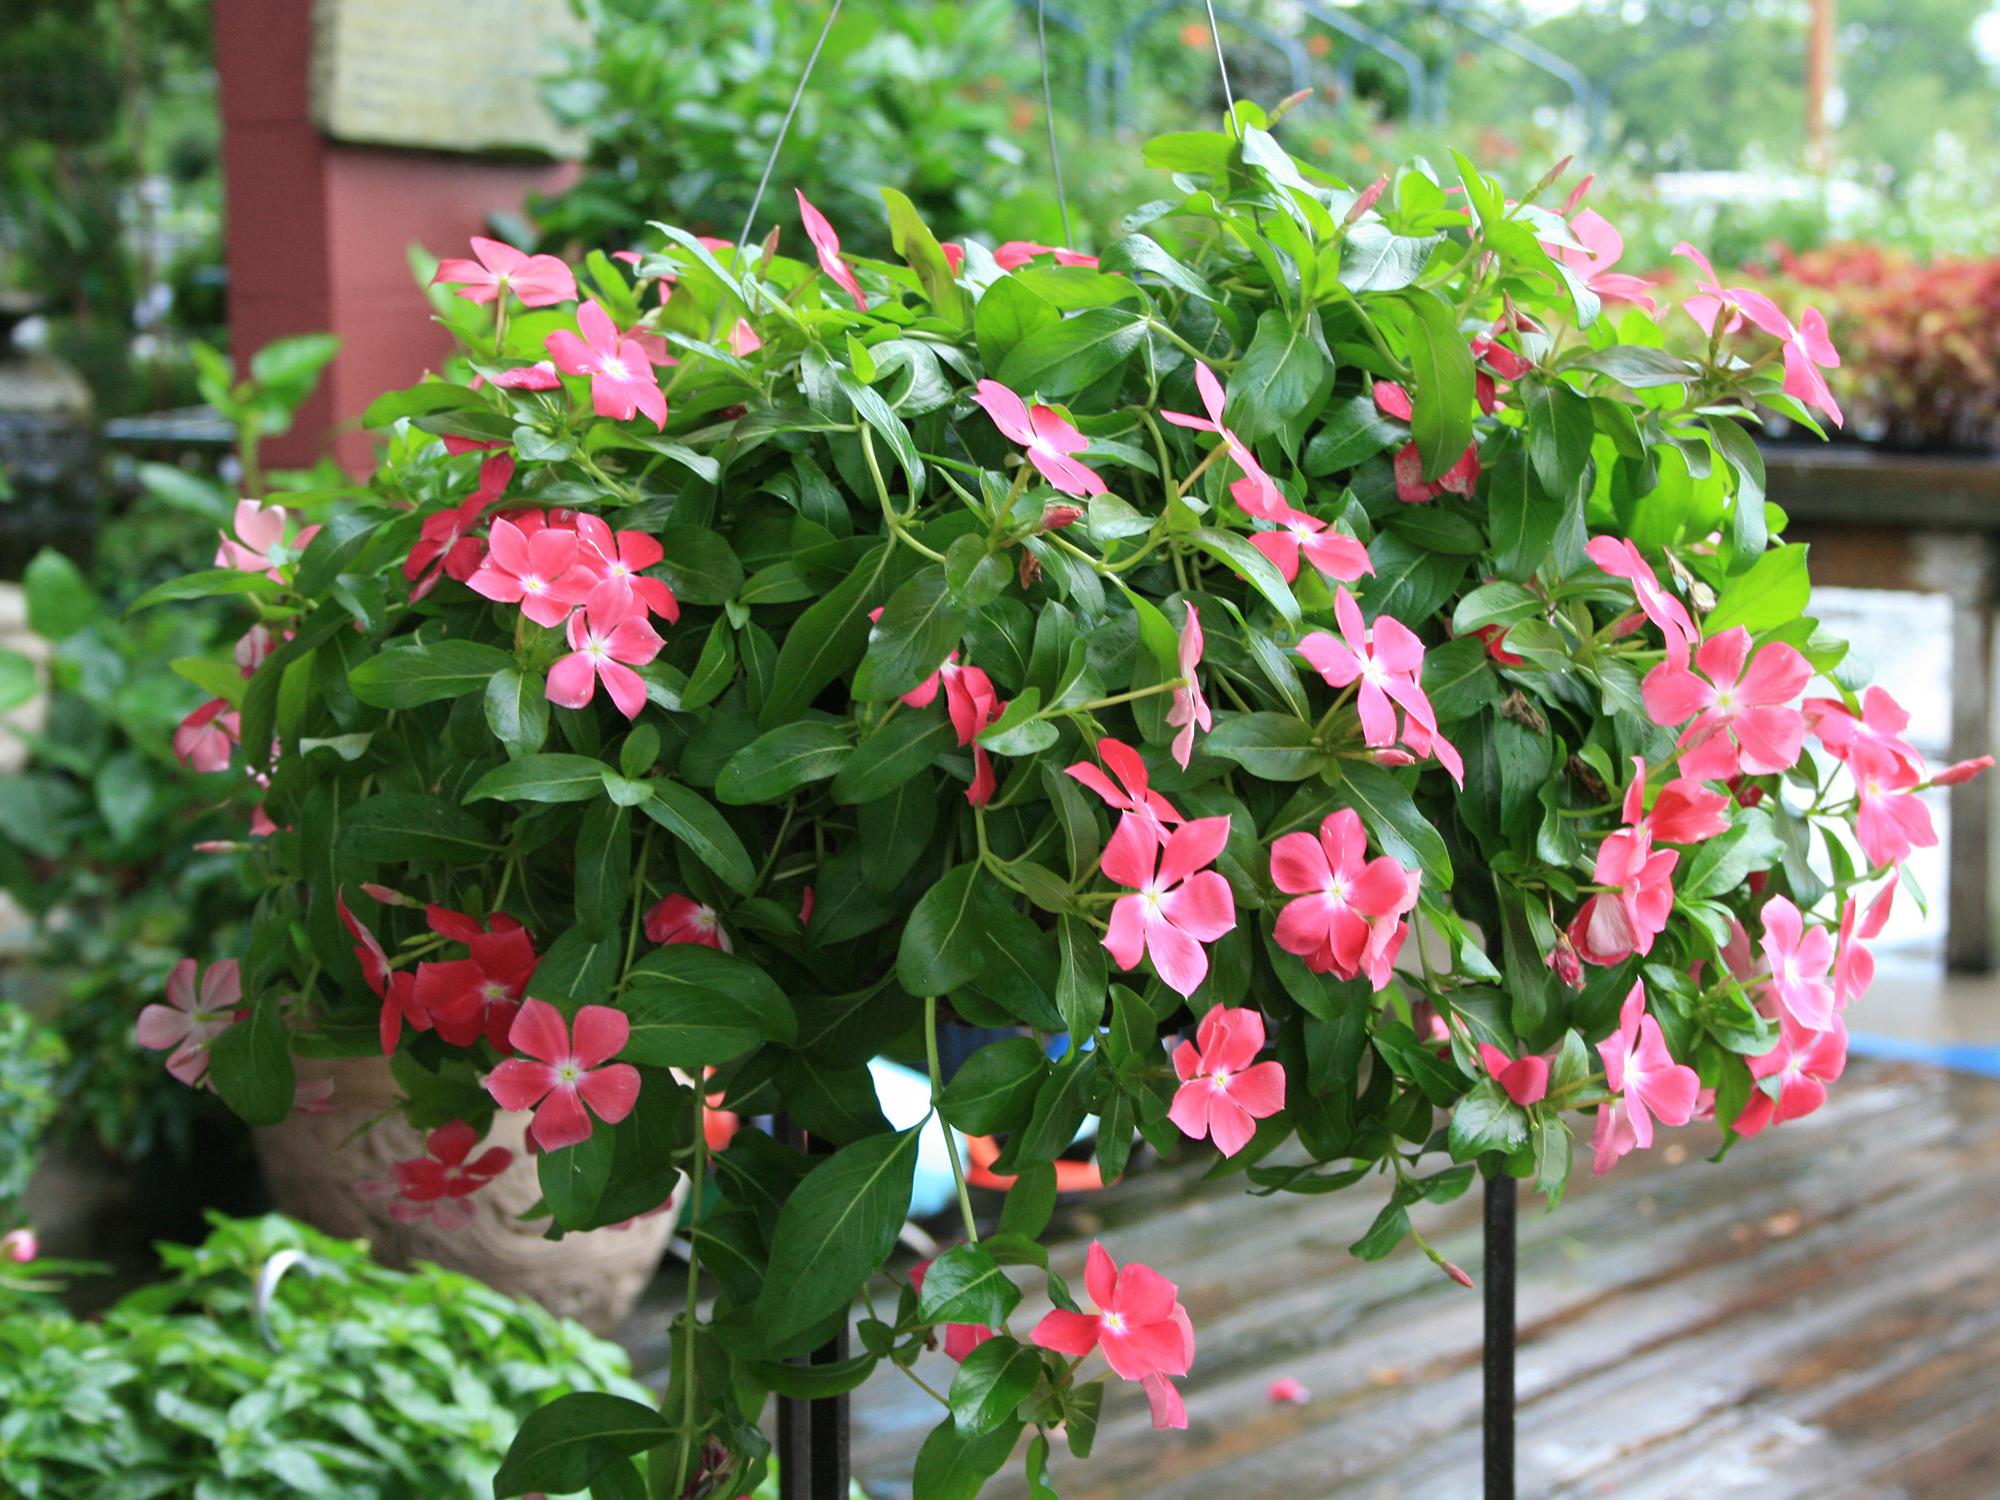 Annual flowering vincas perform well in the landscape and in containers. This Mediterranean Hot Rose has a spreading growth habit that allows it to spill over the edge of a hanging basket. (Photo by MSU Extension/Gary Bachman)